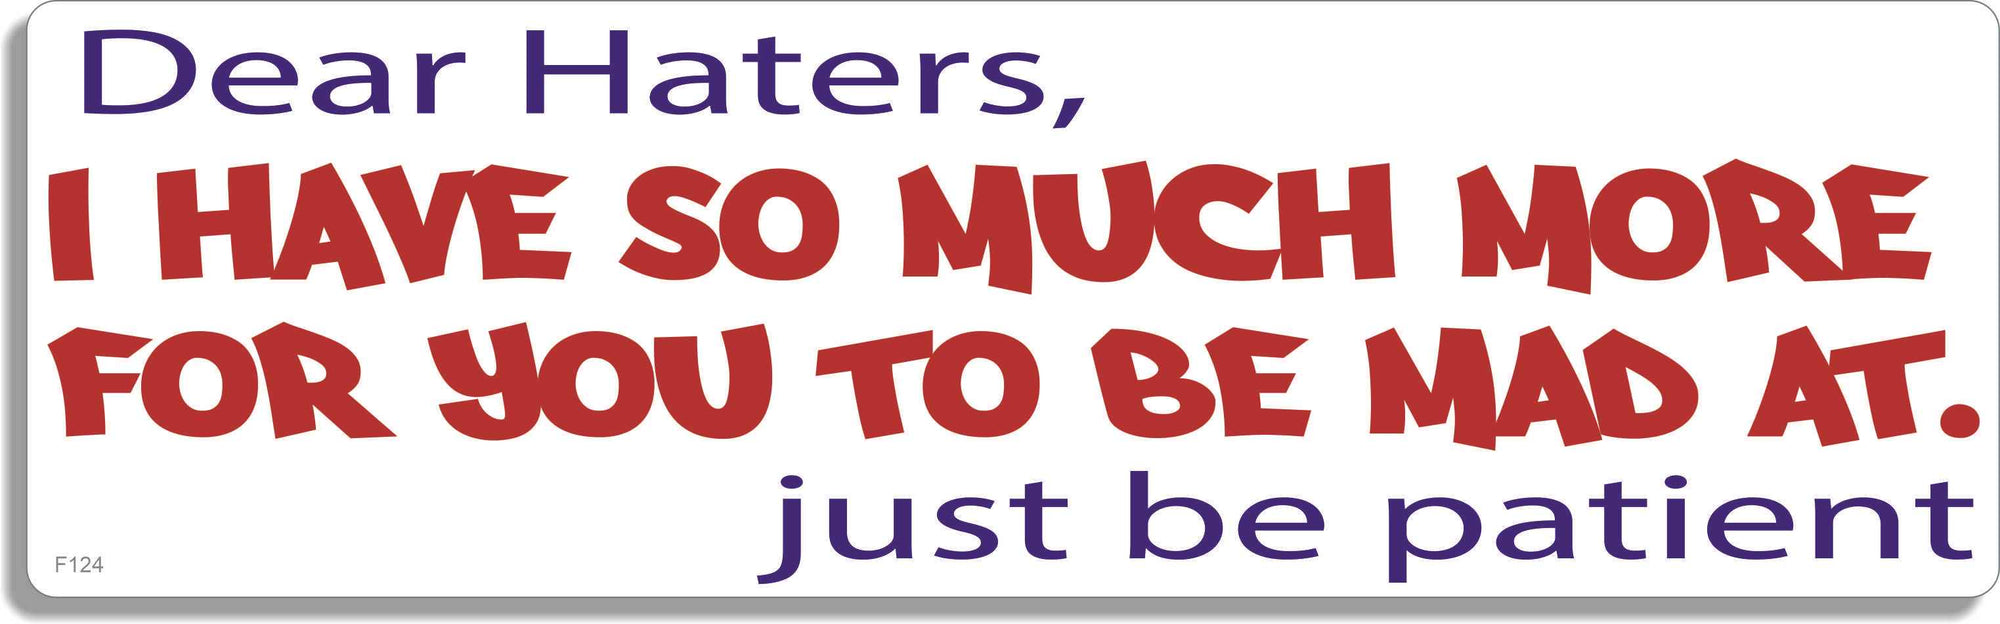 Dear Haters, I have so much more for you to be mad at. Just be patient - 3" x 10" Bumper Sticker--Car Magnet- -  Decal Bumper Sticker-funny Bumper Sticker Car Magnet Dear Haters, I have so much more-  Decal for cars funny, funny quote, funny saying